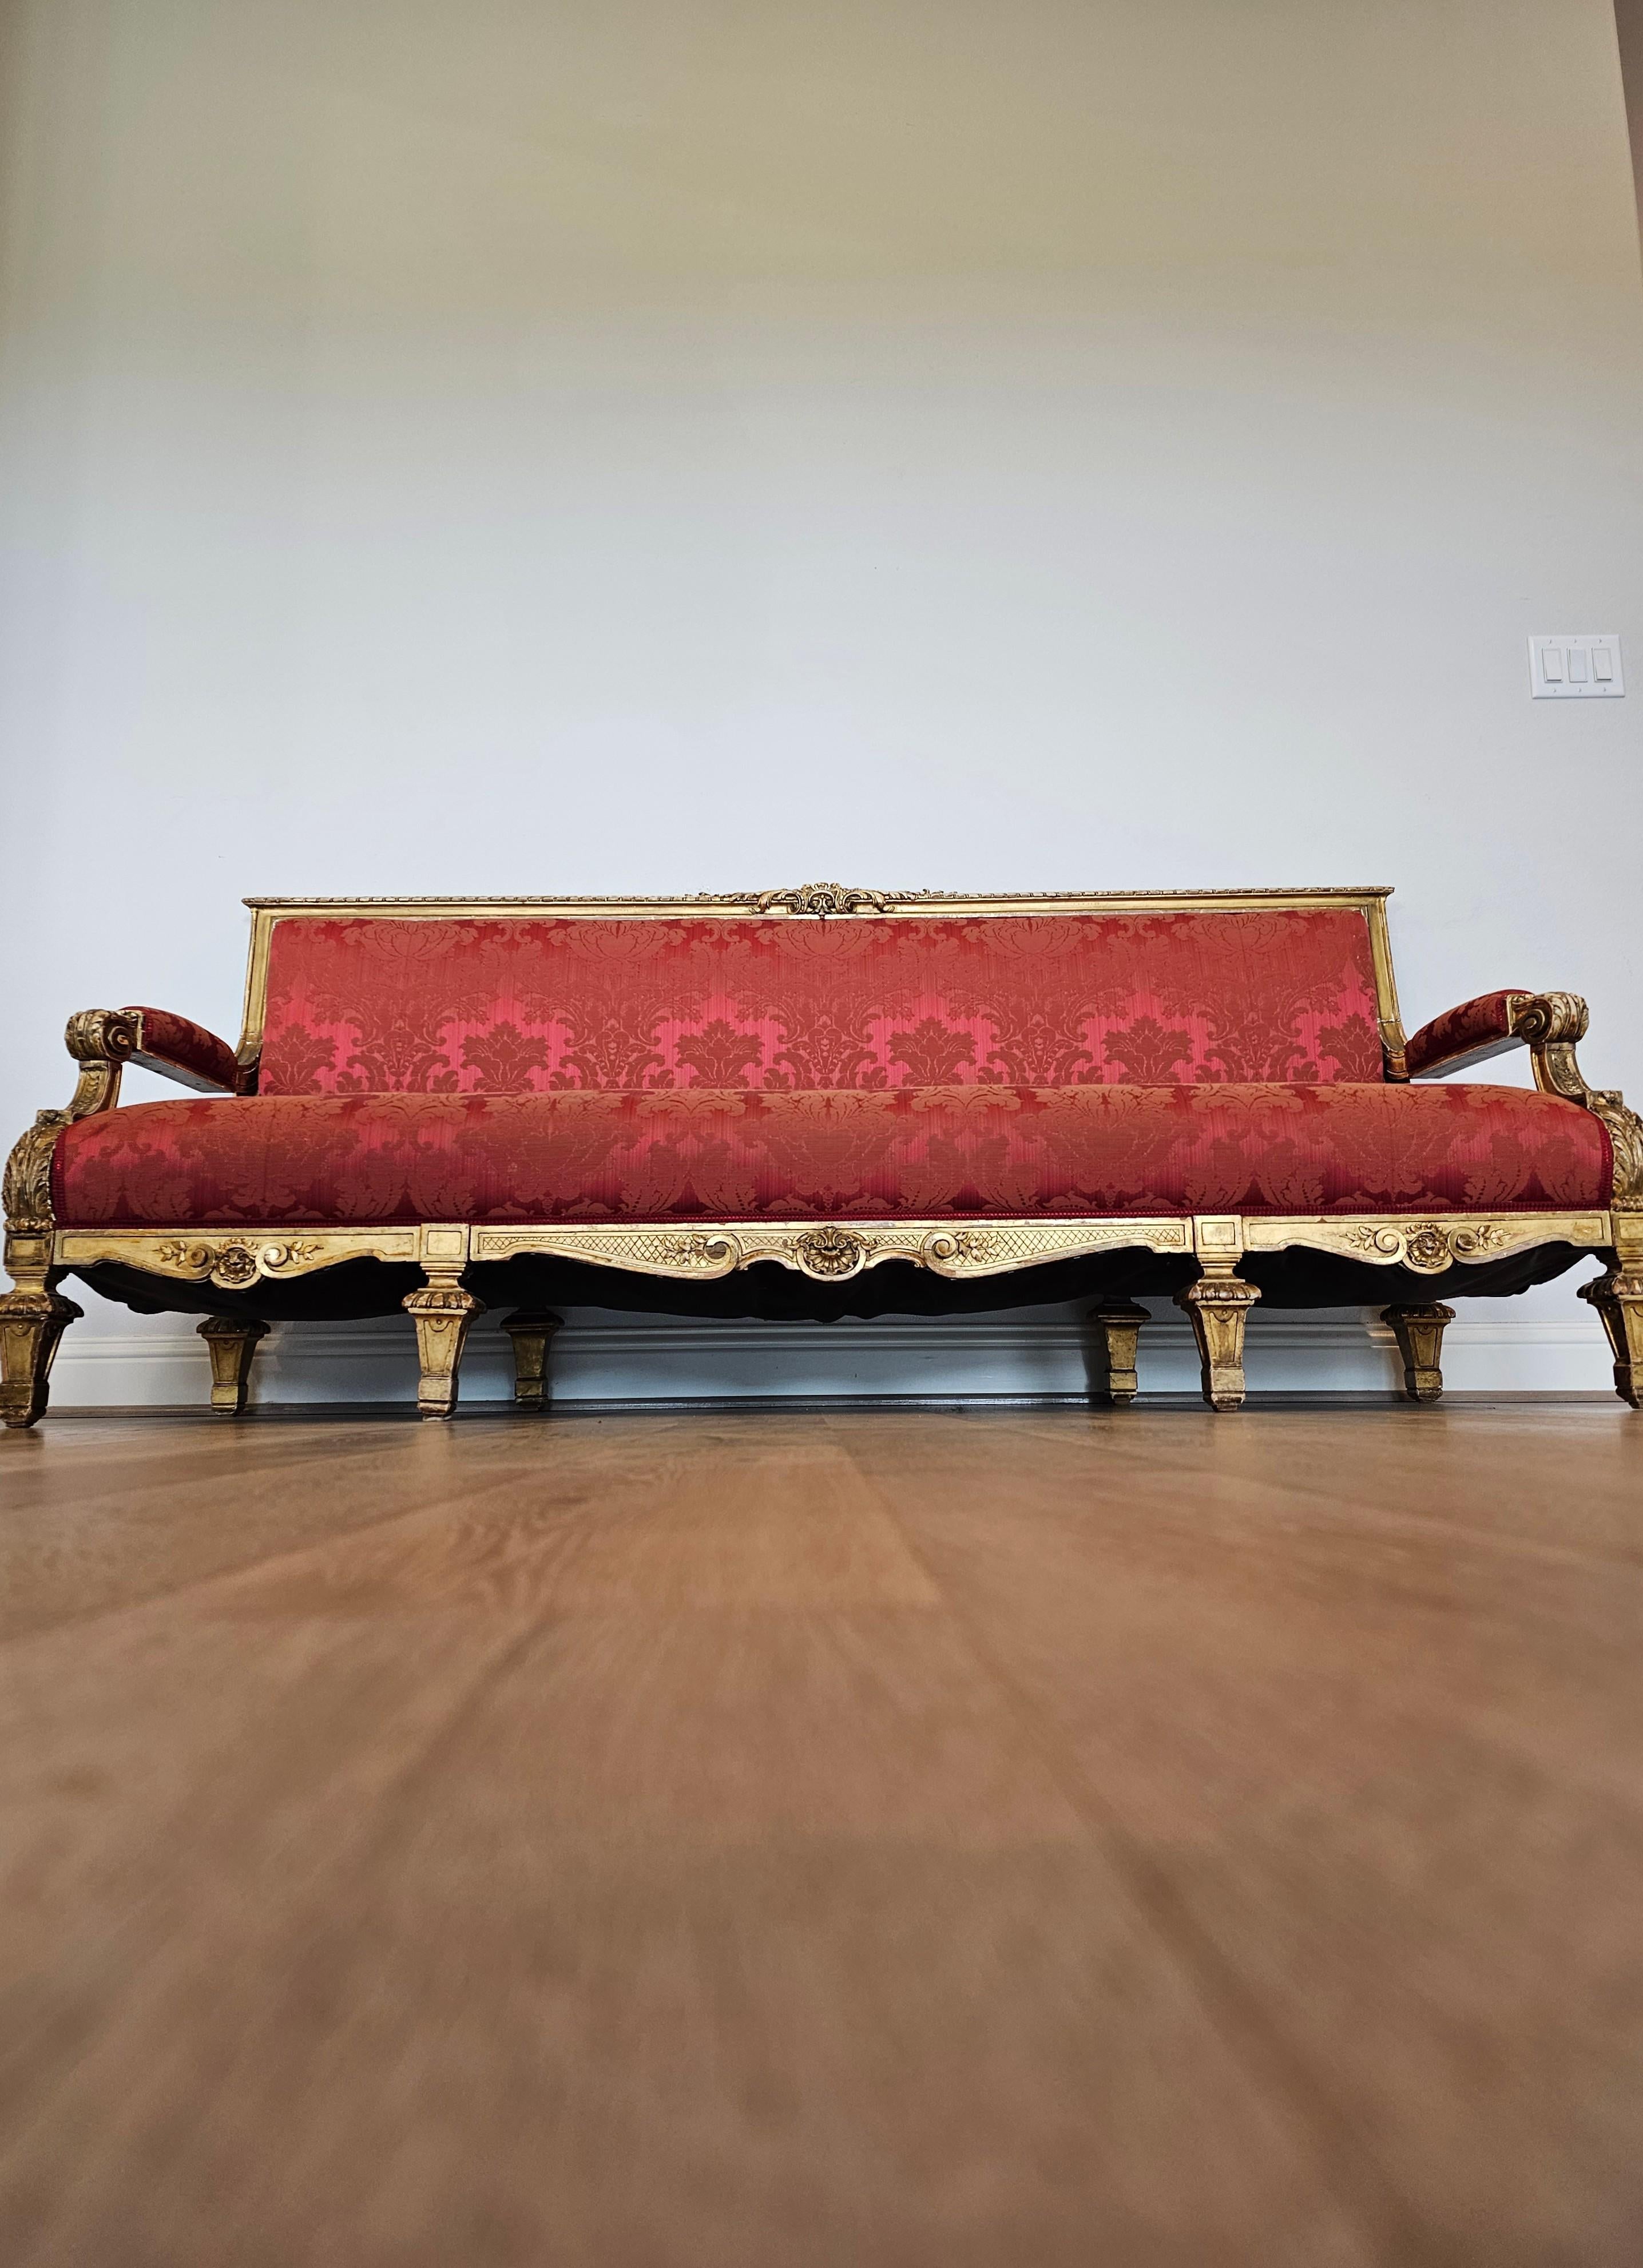 Add a touch of sophisticated elegance, timeless luxury and romantic warmth with this striking Belle Époque period French gilt wood four seater long sofa. 

Exquisitely hand-crafted in France in the late 19th / early 20th century, most likely